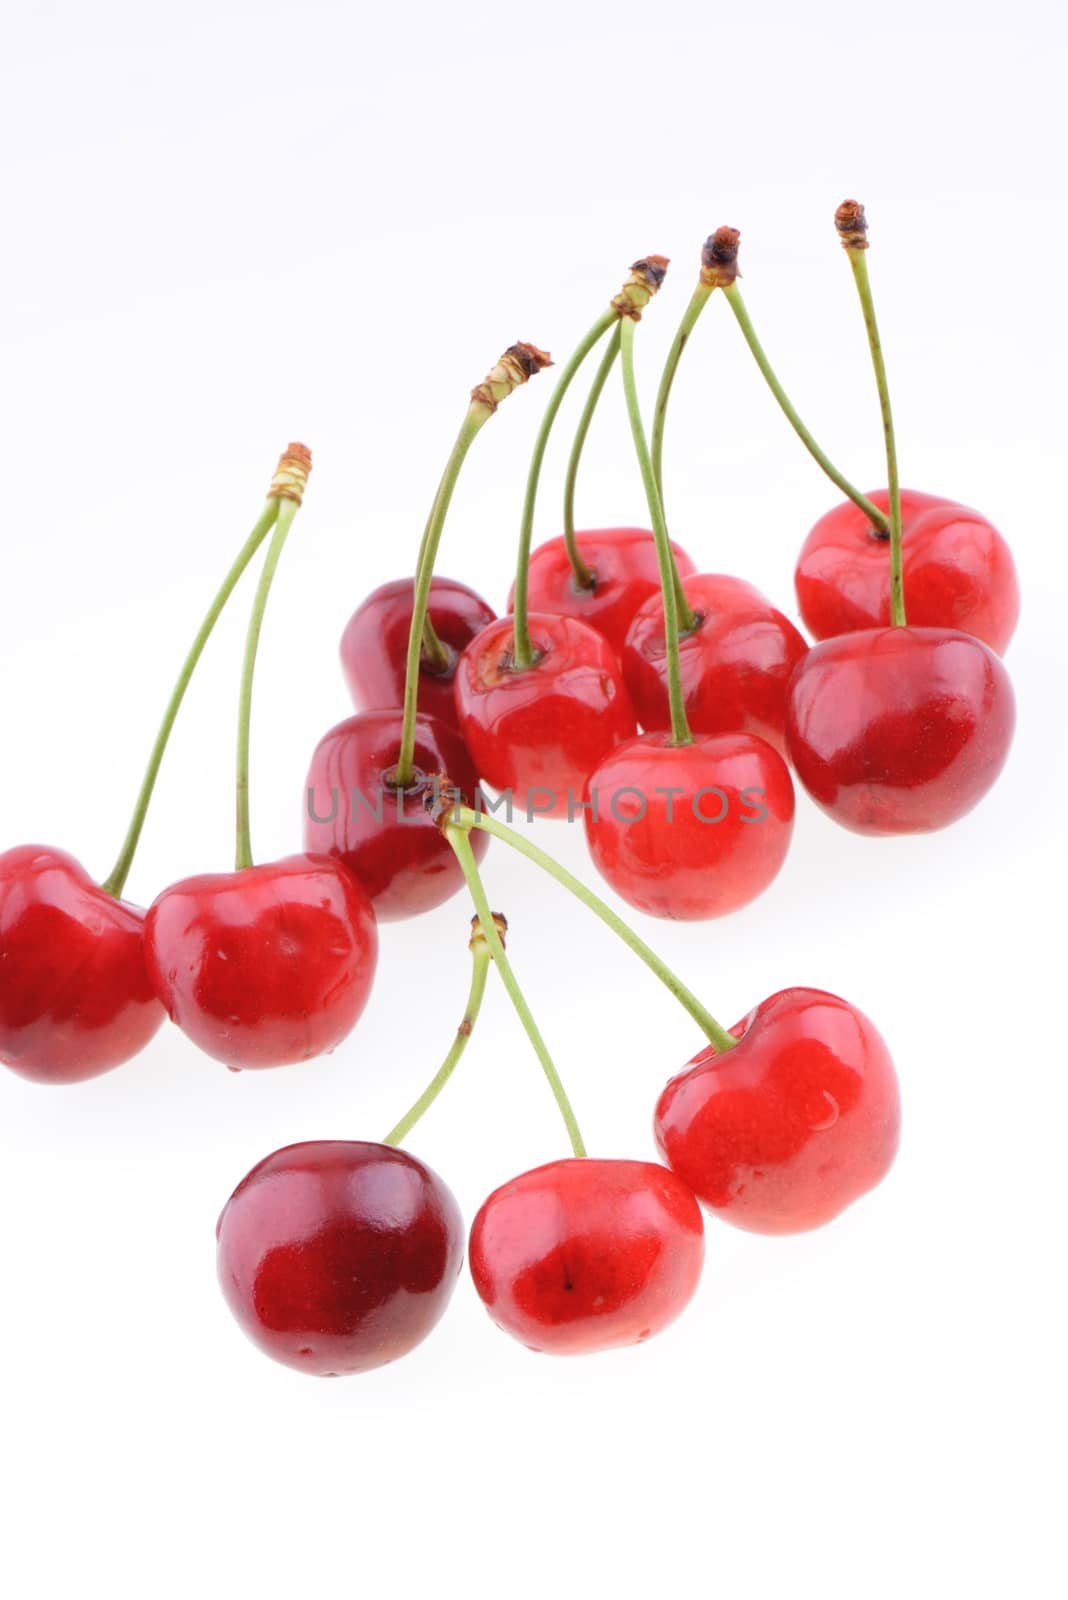 Sweet cherries isolated on a white background by bbbar